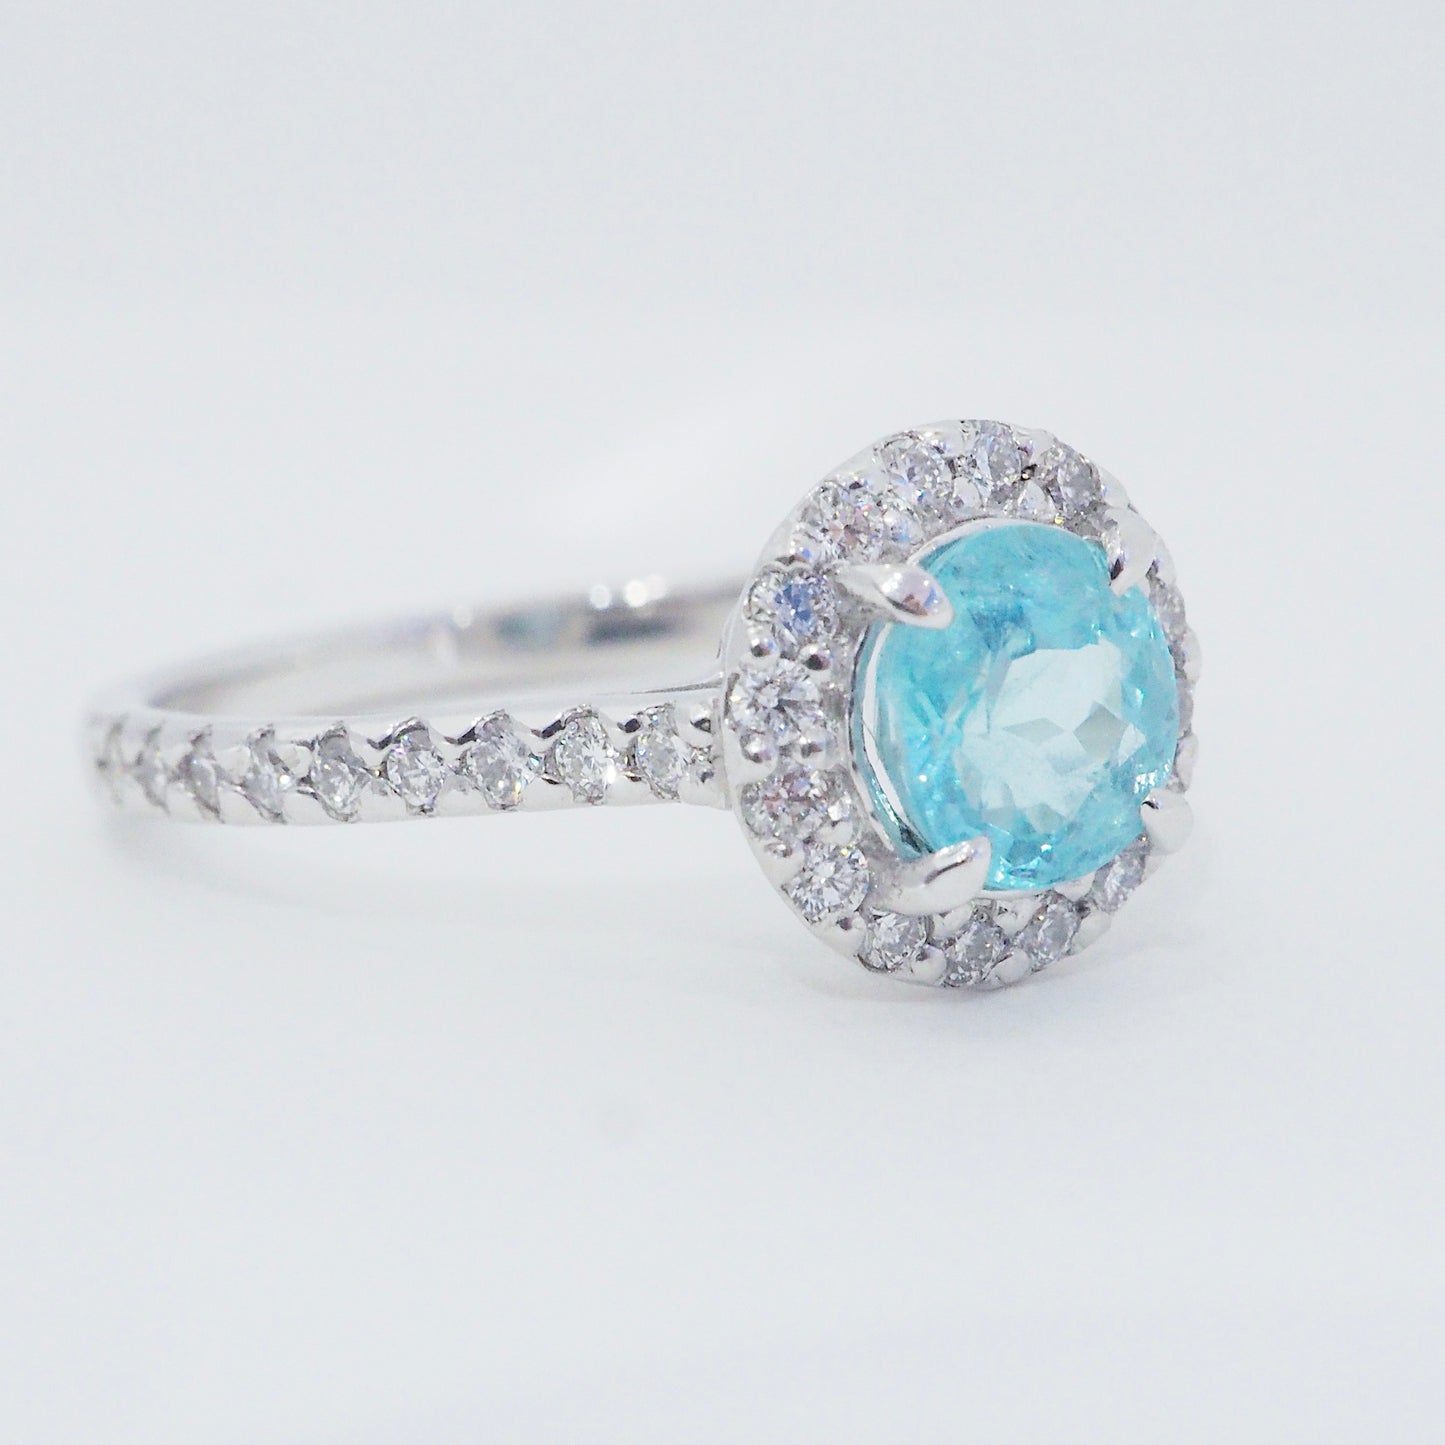 Load image into Gallery viewer, 【Unique Solitaire／ユニークソリテール】Paraiba Tourmaline-Princess／パライバトルマリン-プリンセス【リング】
